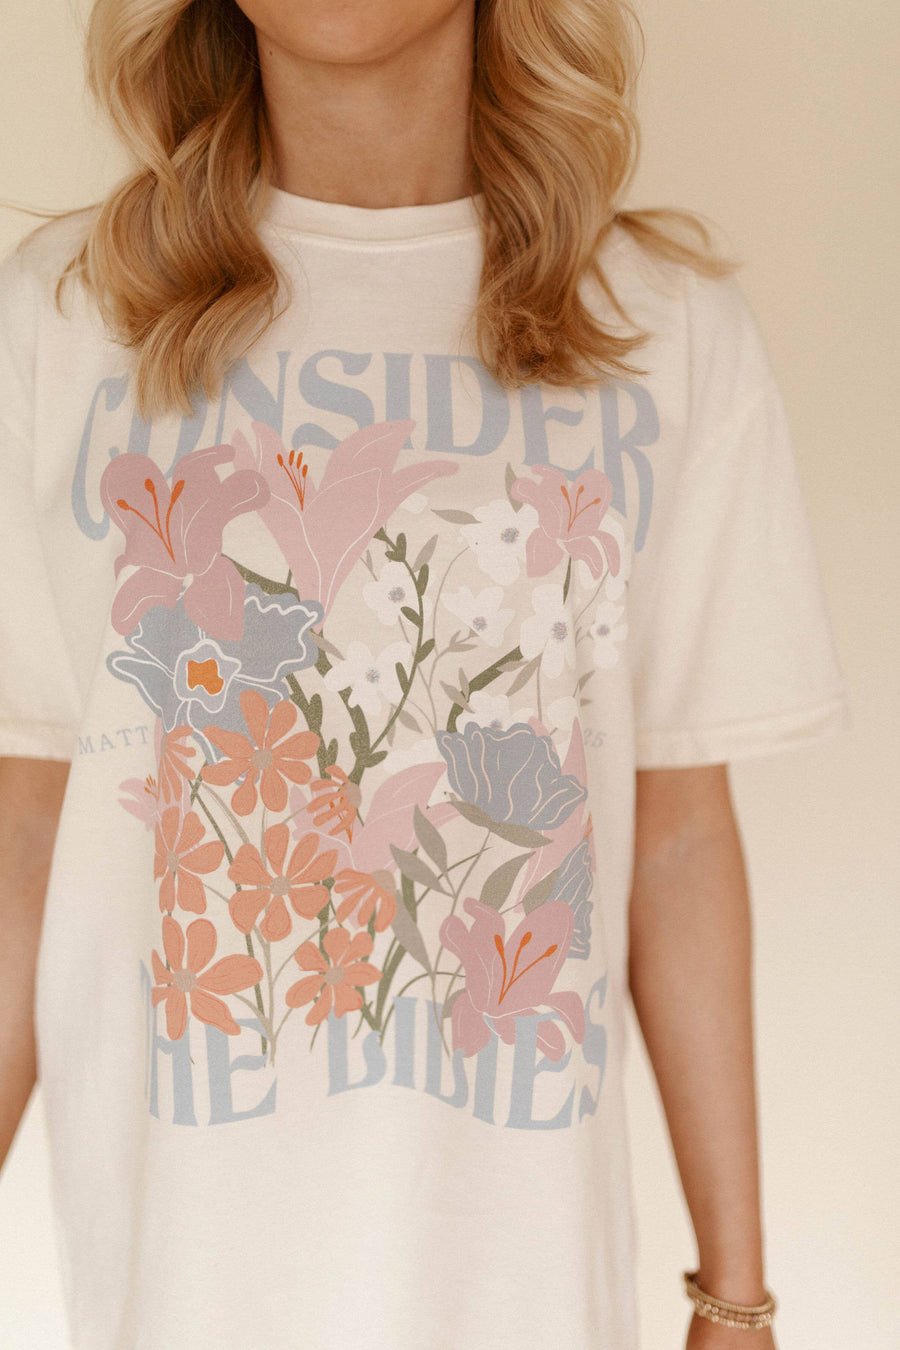 Consider The Lilies Graphic Tee